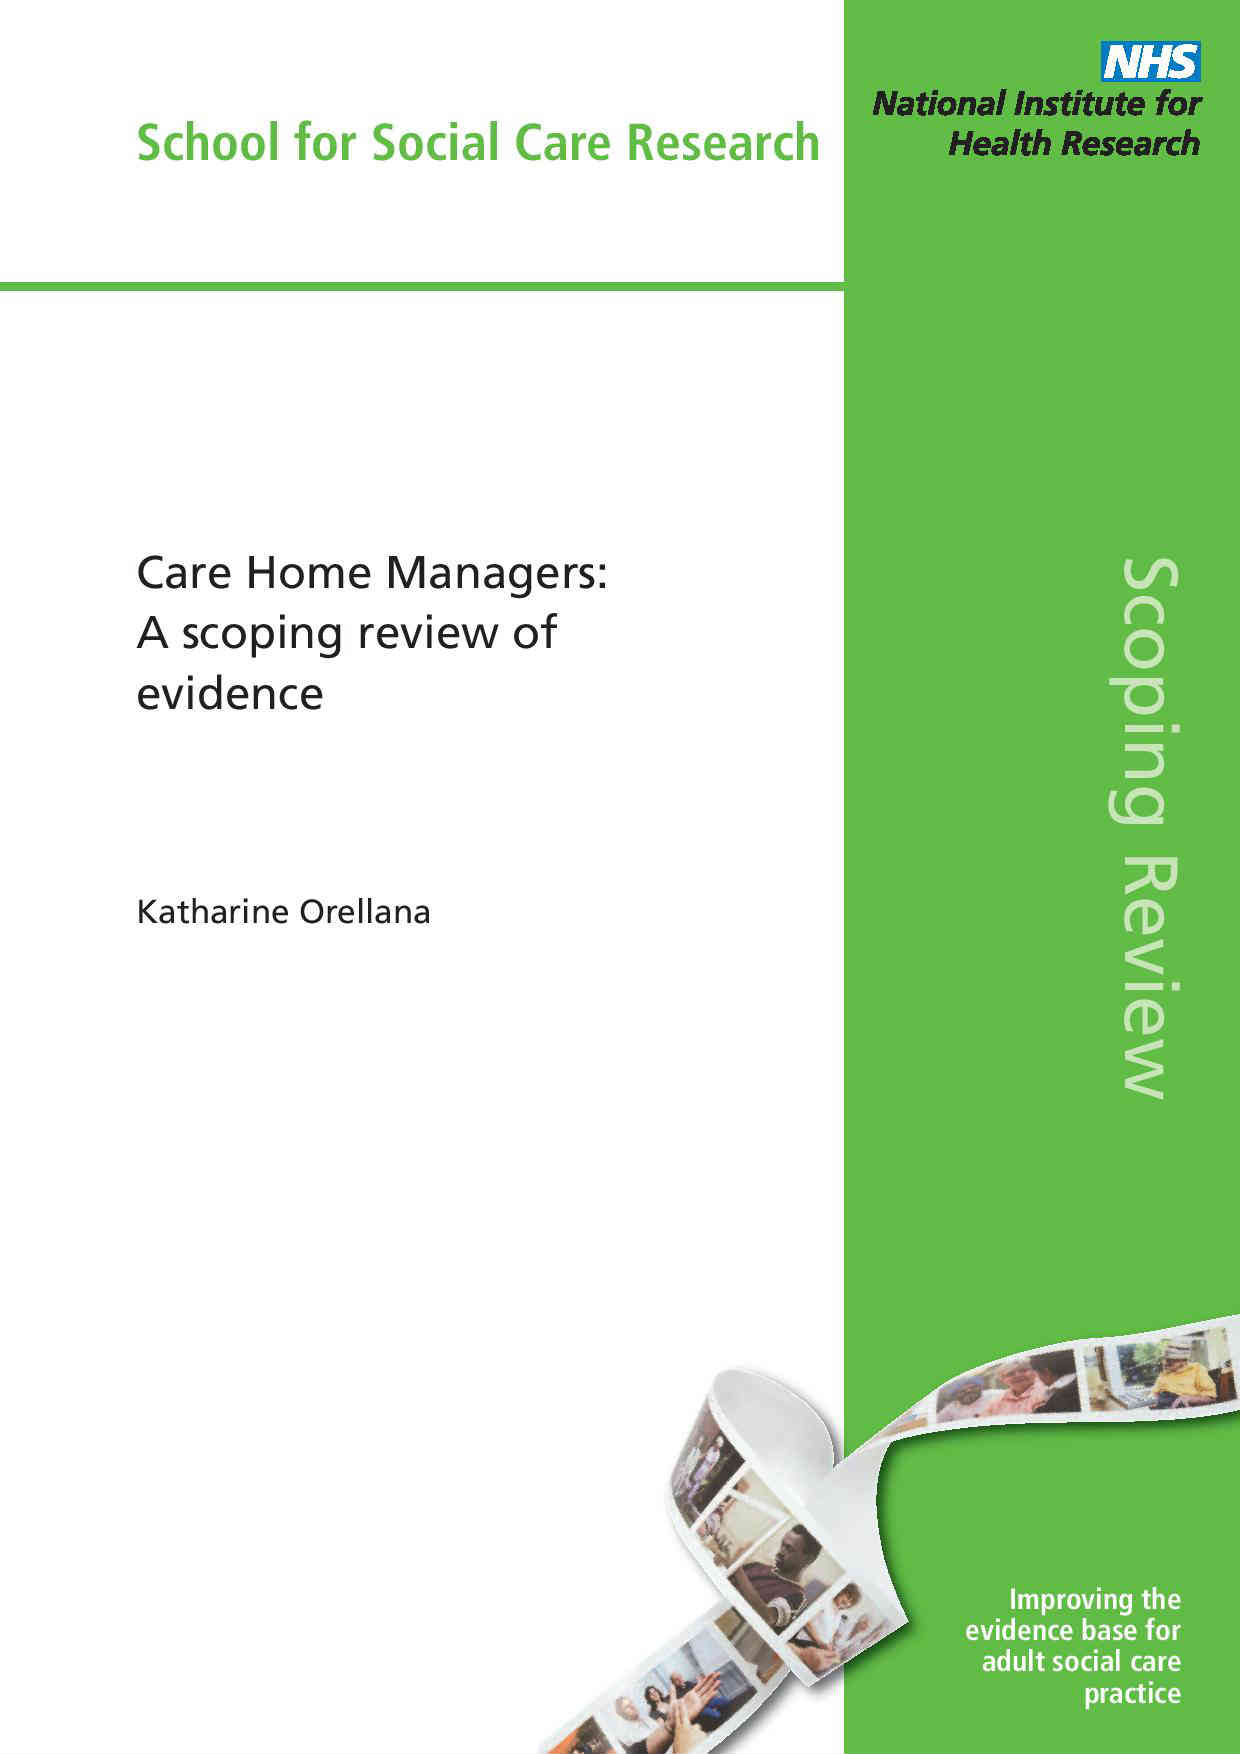 Care Home Managers: A scoping review of evidence